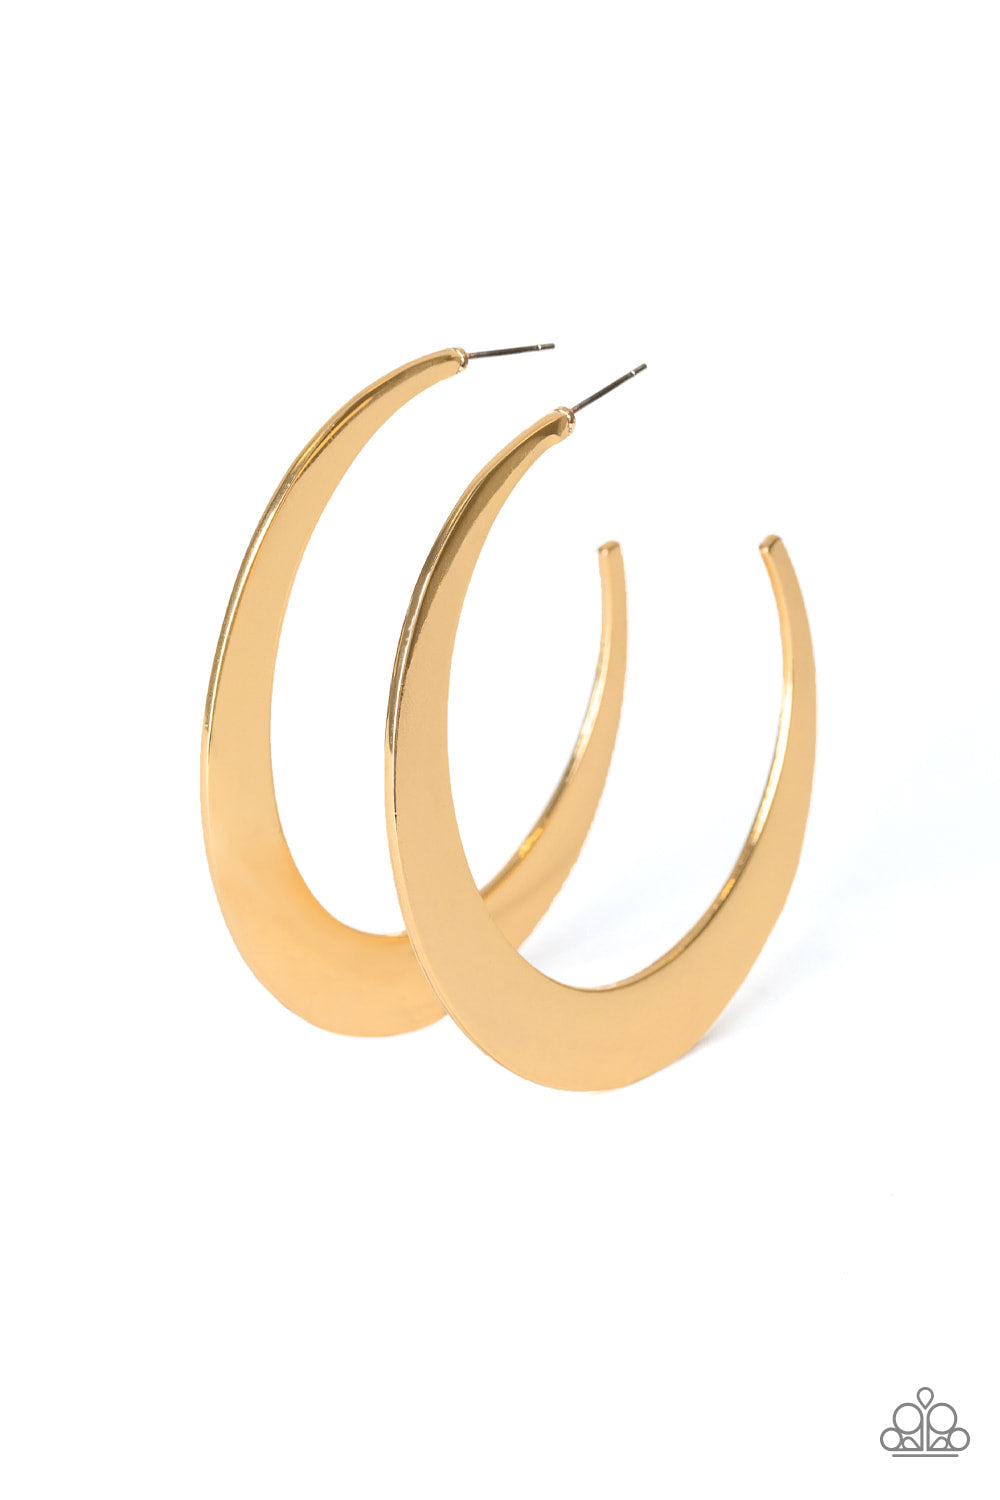 Moon Beam - Gold - Earrings - Paparazzi Accessories